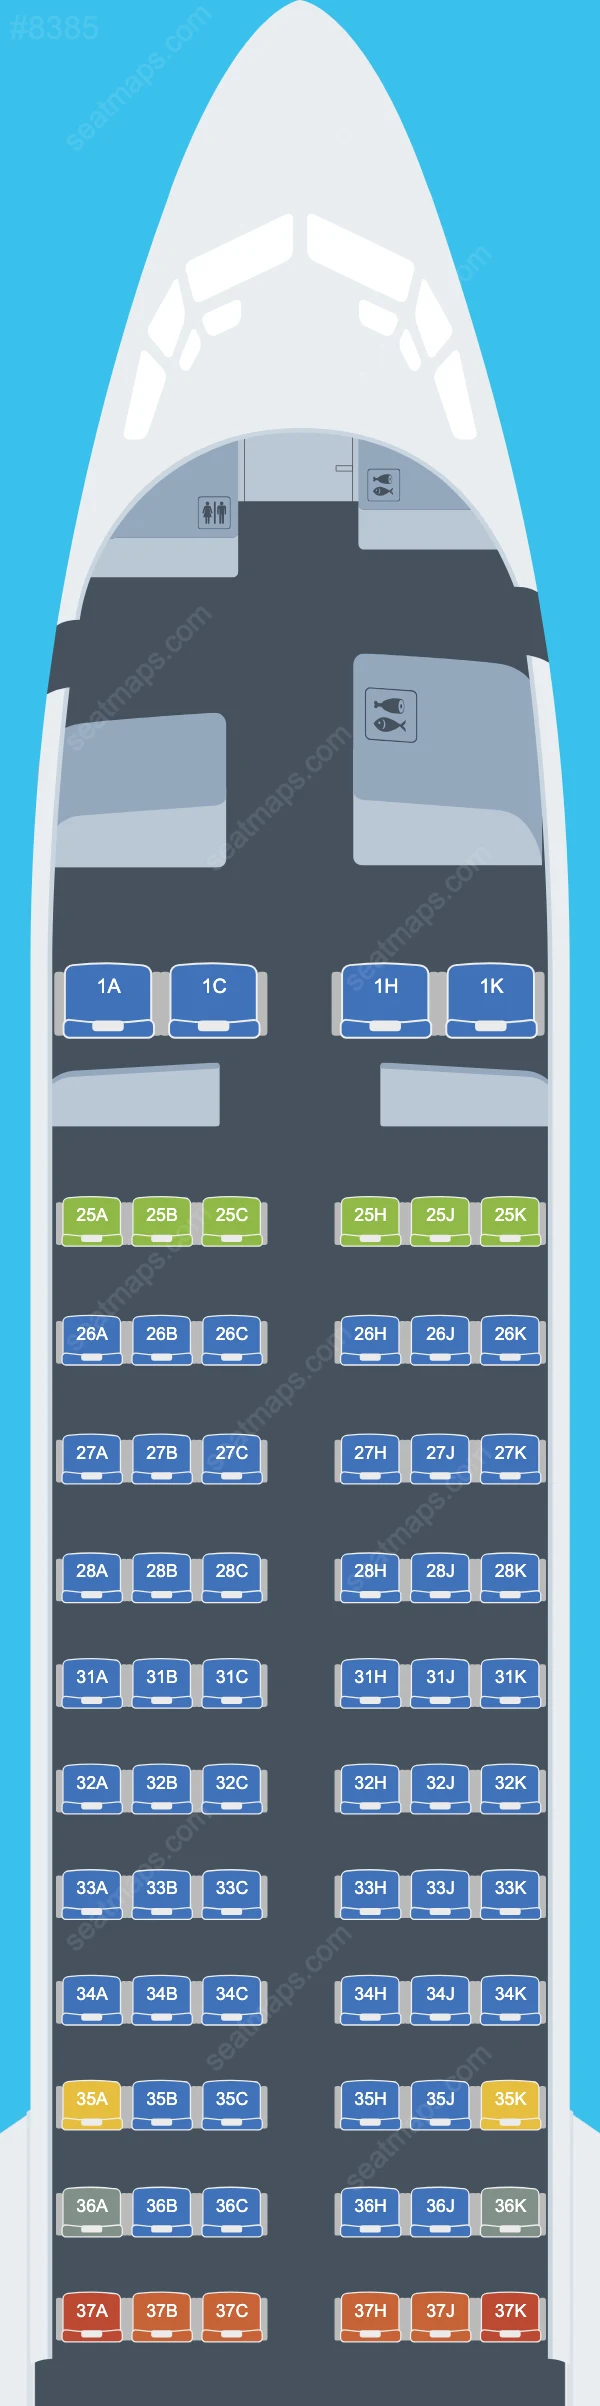 China Southern Boeing 737 MAX 8 V.2 seatmap preview